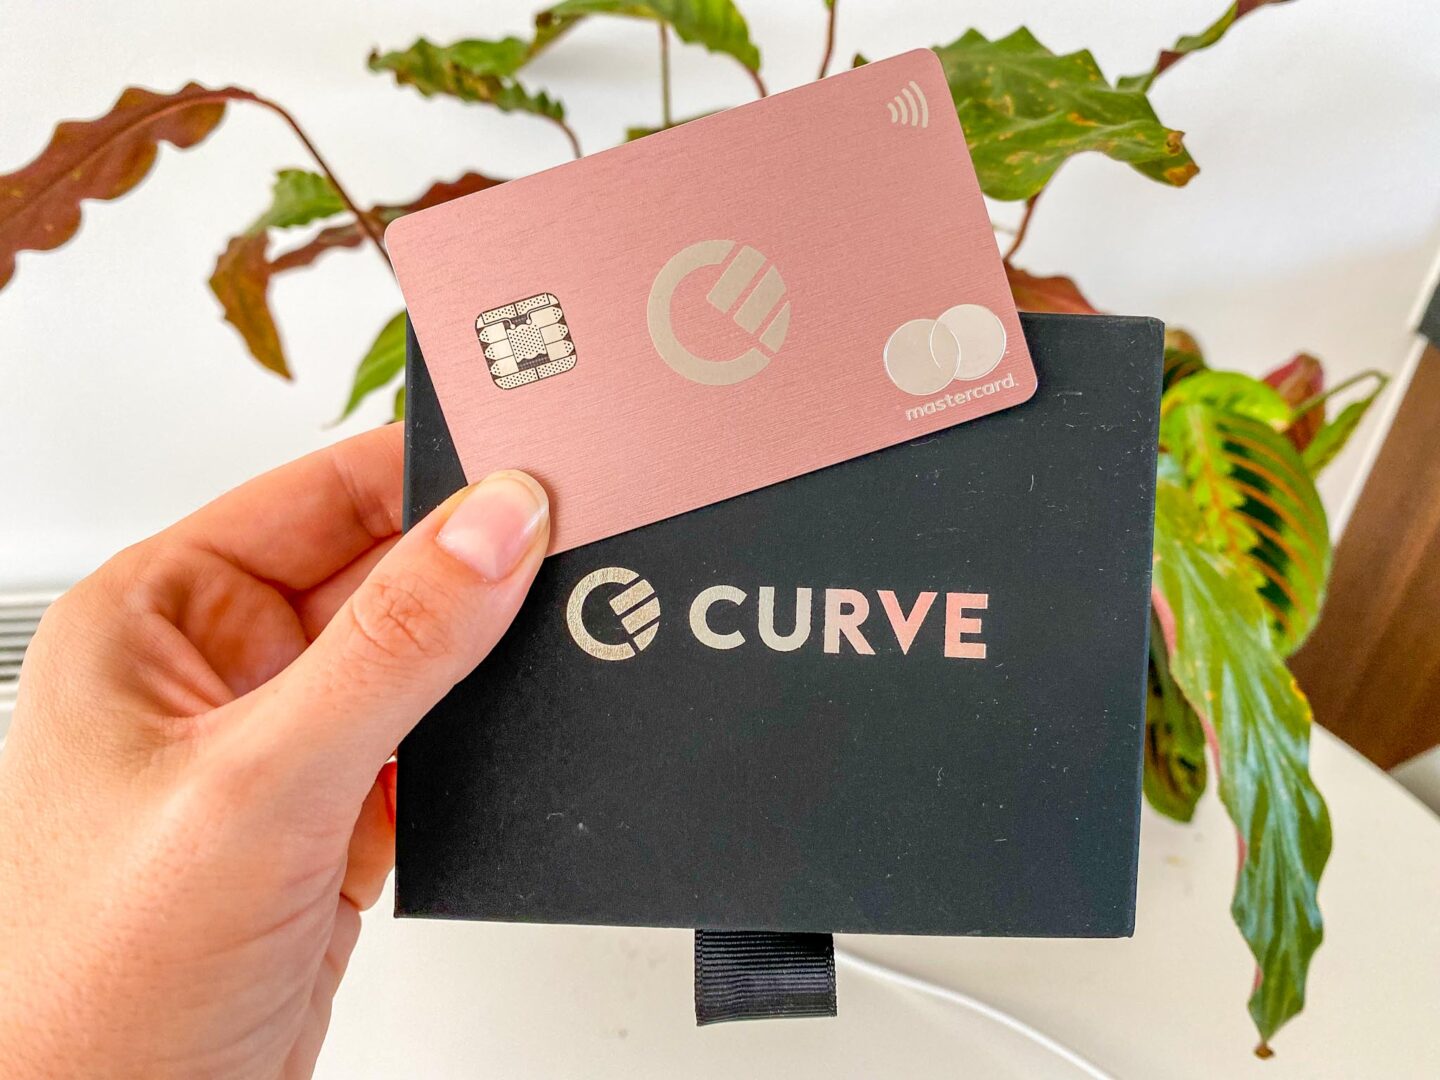 Curve Card for Travel